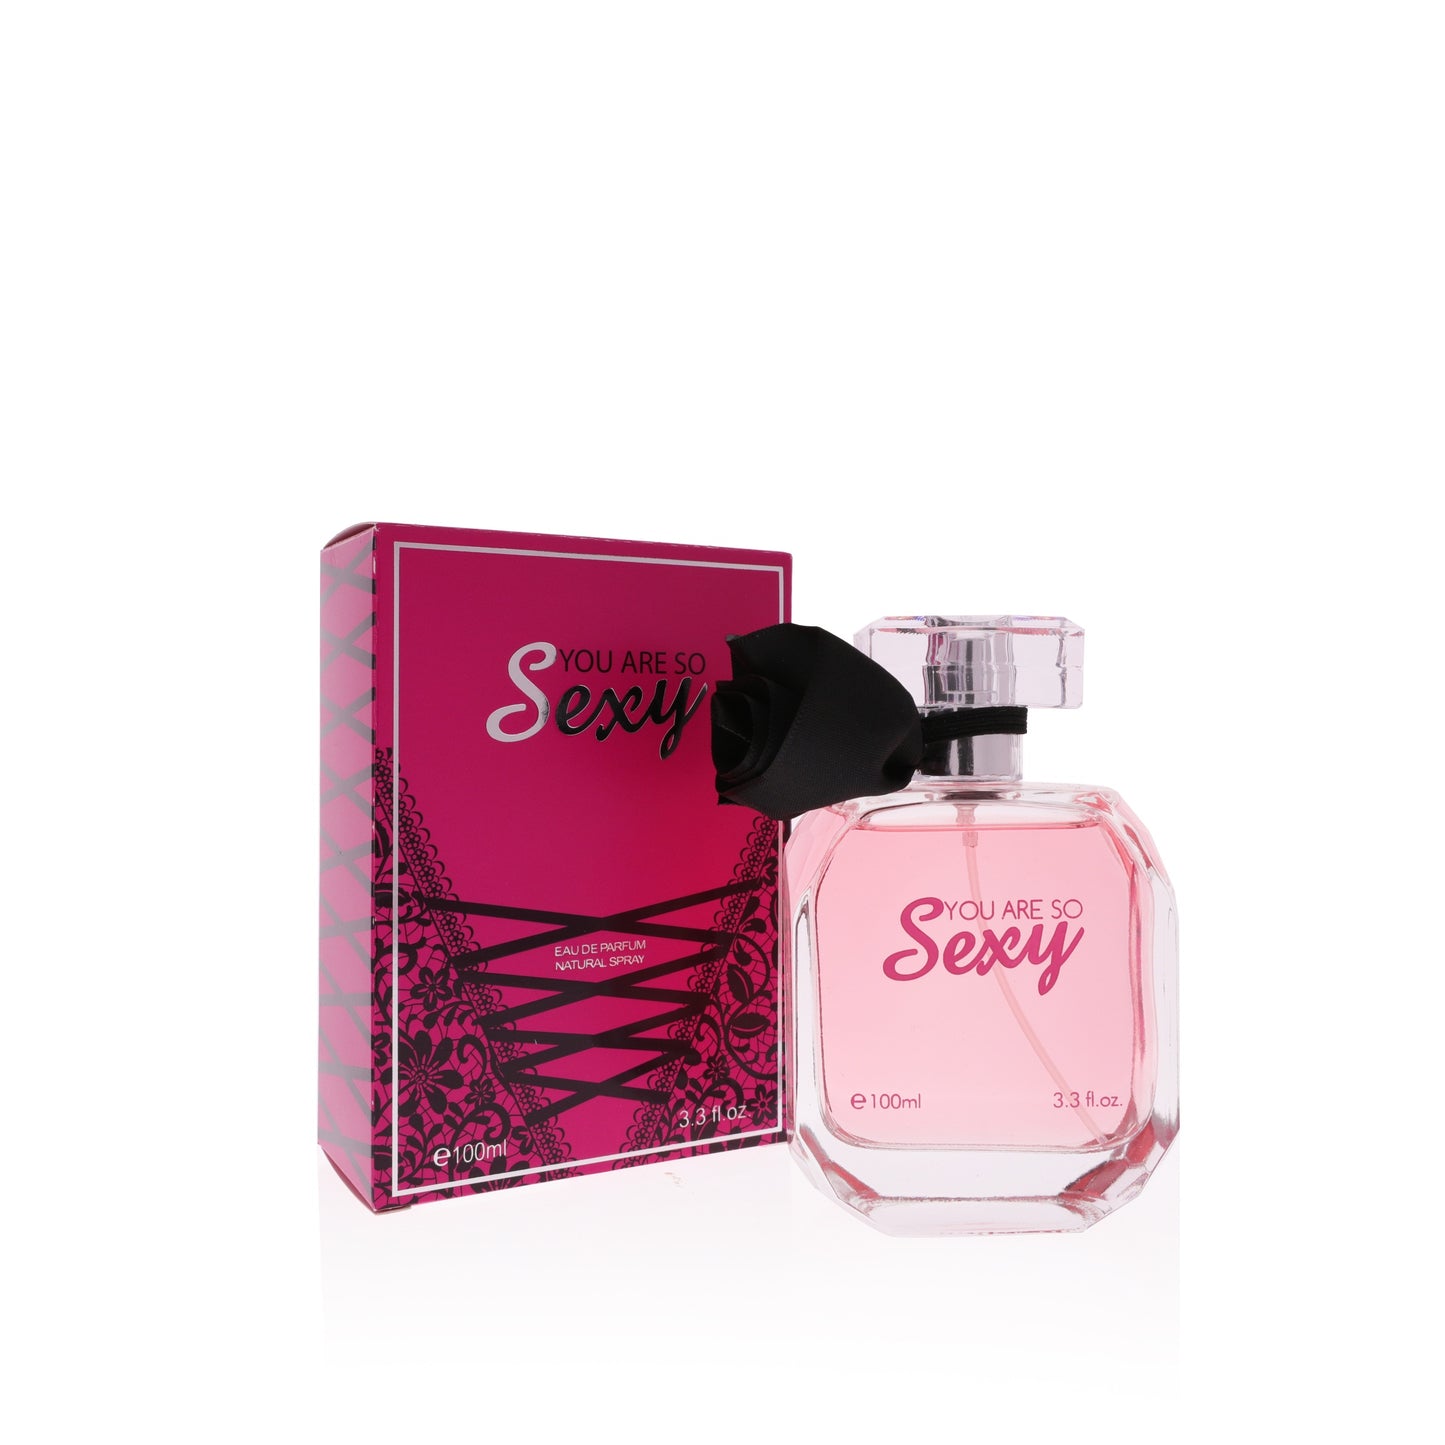 You Are So Sexy Women's Fragrance: Embrace Your Allure with this Captivating and Seductive Scent - A Must-Have for the Modern Woman's Signature Collection!